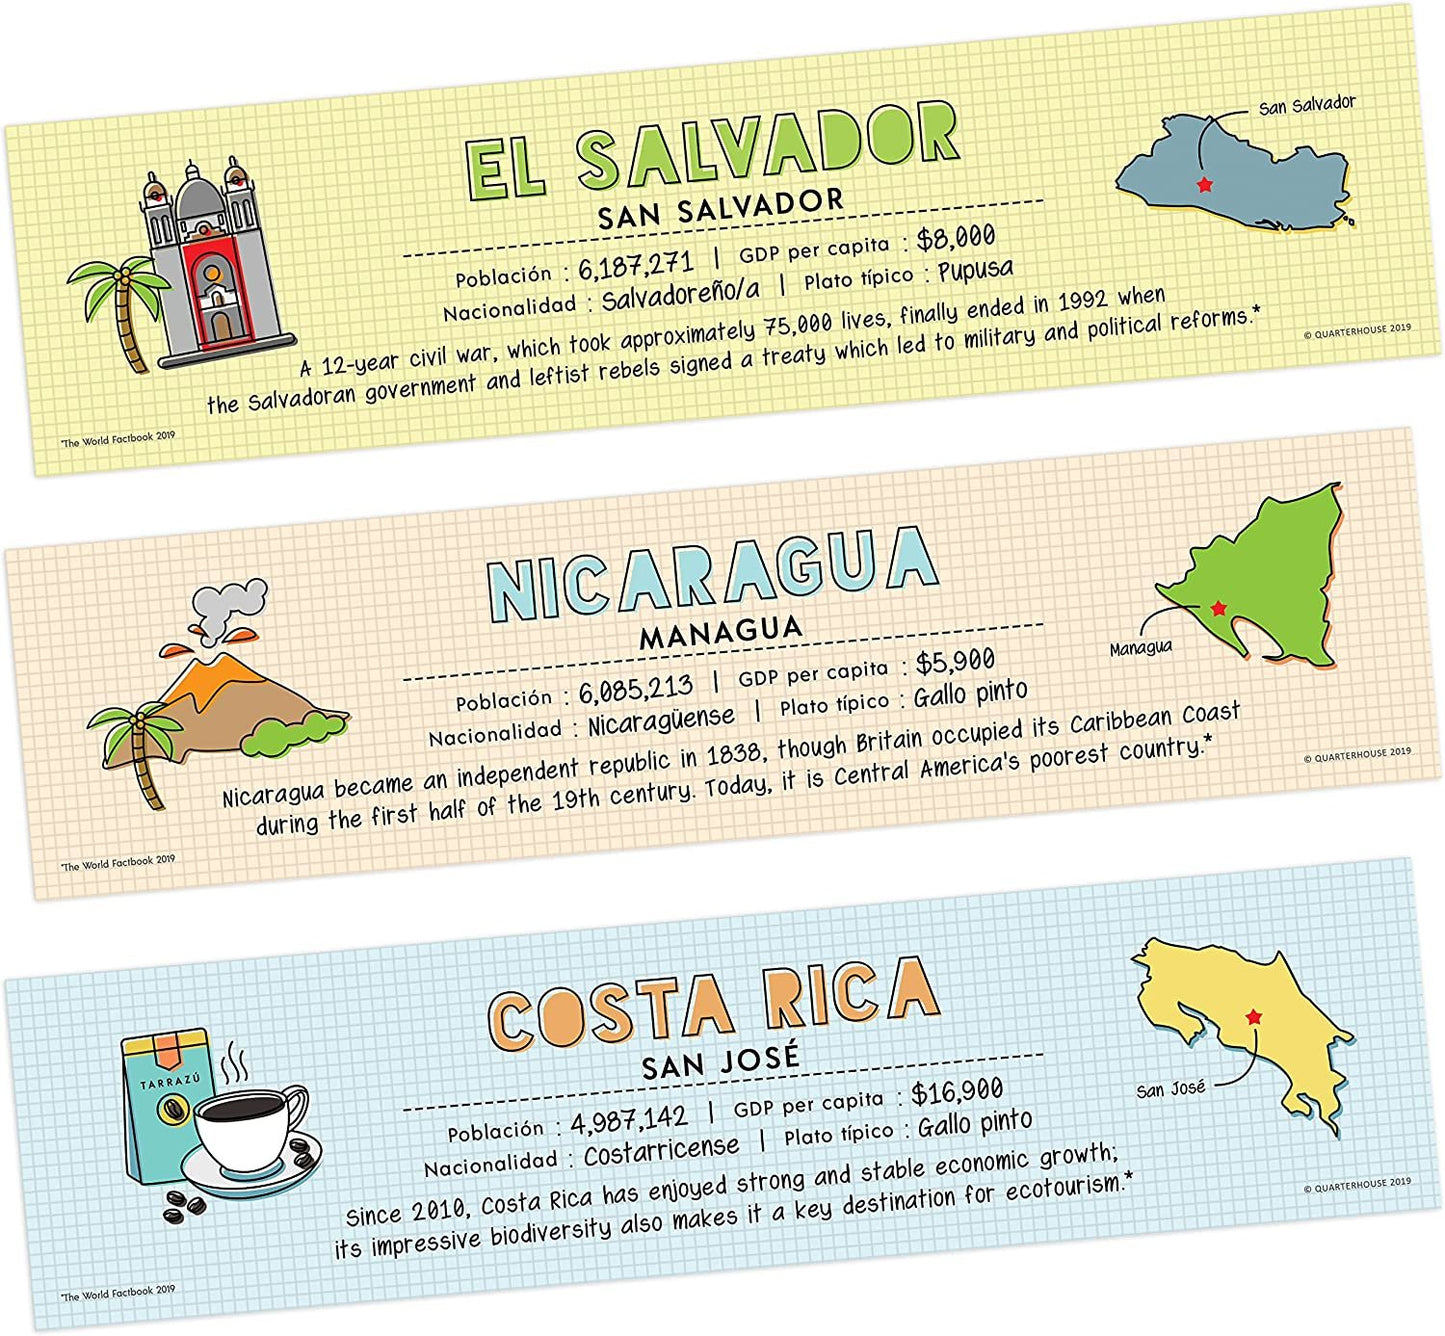 Quarterhouse Spanish Language Country Labels - 18 Latin American Countries Plus (New) Spain, Puerto Rico, and Equatorial Guinea - Non-Adhesive Label Set, Spanish Learning Materials for K-12 Students and Teachers, Set of 21, 12 x 3 Inches, Extra Durable